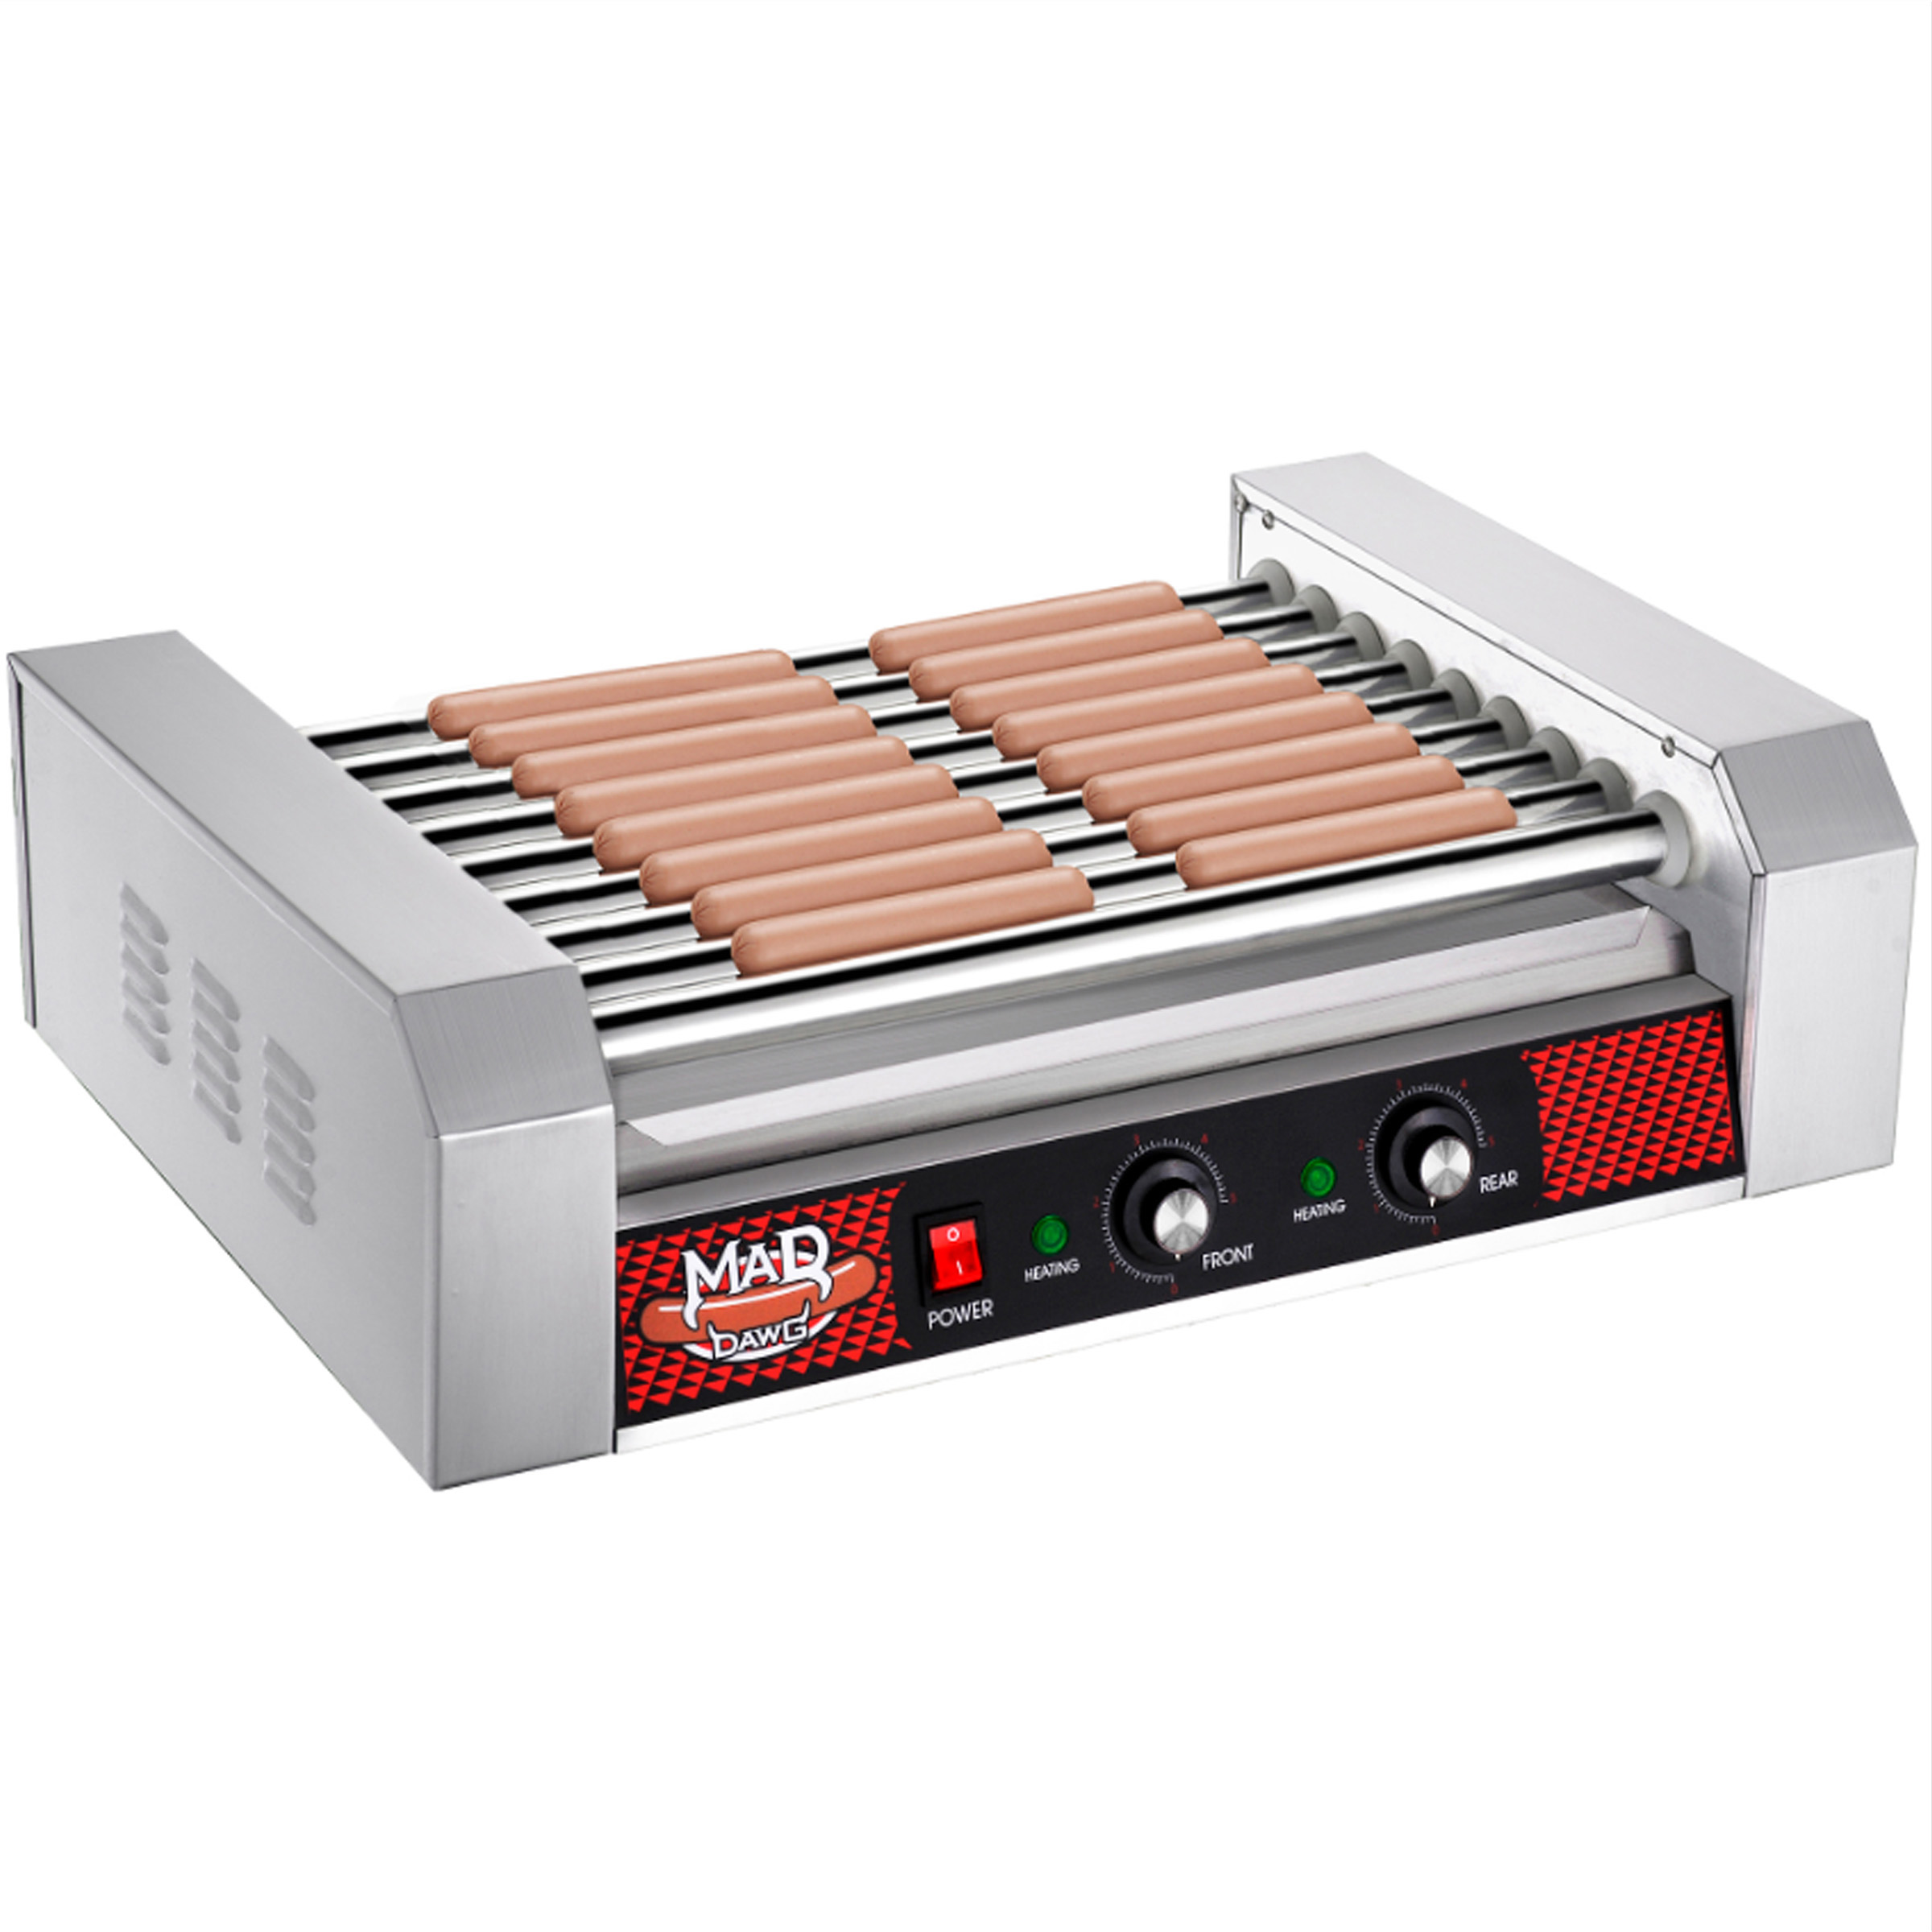 24 Hot Dog Roller Machine- 9 Rollers, Hotdog or Sausage Grill -Electric Countertop Cooker, Drip Tray & Dual Zones by Great Northern Popcorn - image 1 of 5